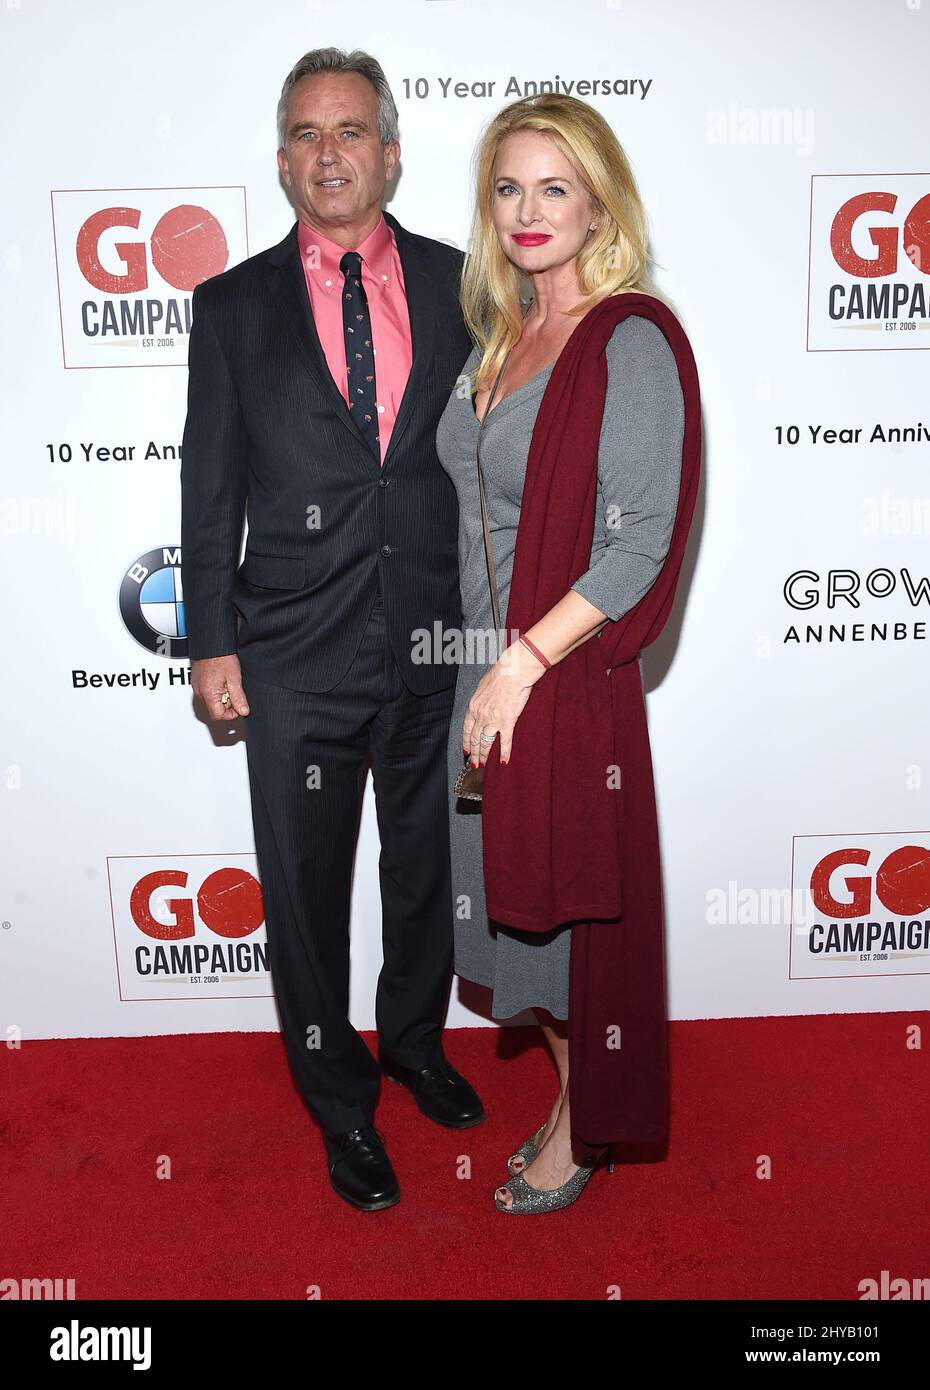 Robert F. Kennedy Jr. and Donna Dixon attends the 10th Annual GO Campaign Gala held at Manuela at Hauser Wirth & Schimmel. GO Campaign champions local heroes around the world who are improving the lives of orphans and vulnerable children. Stock Photo